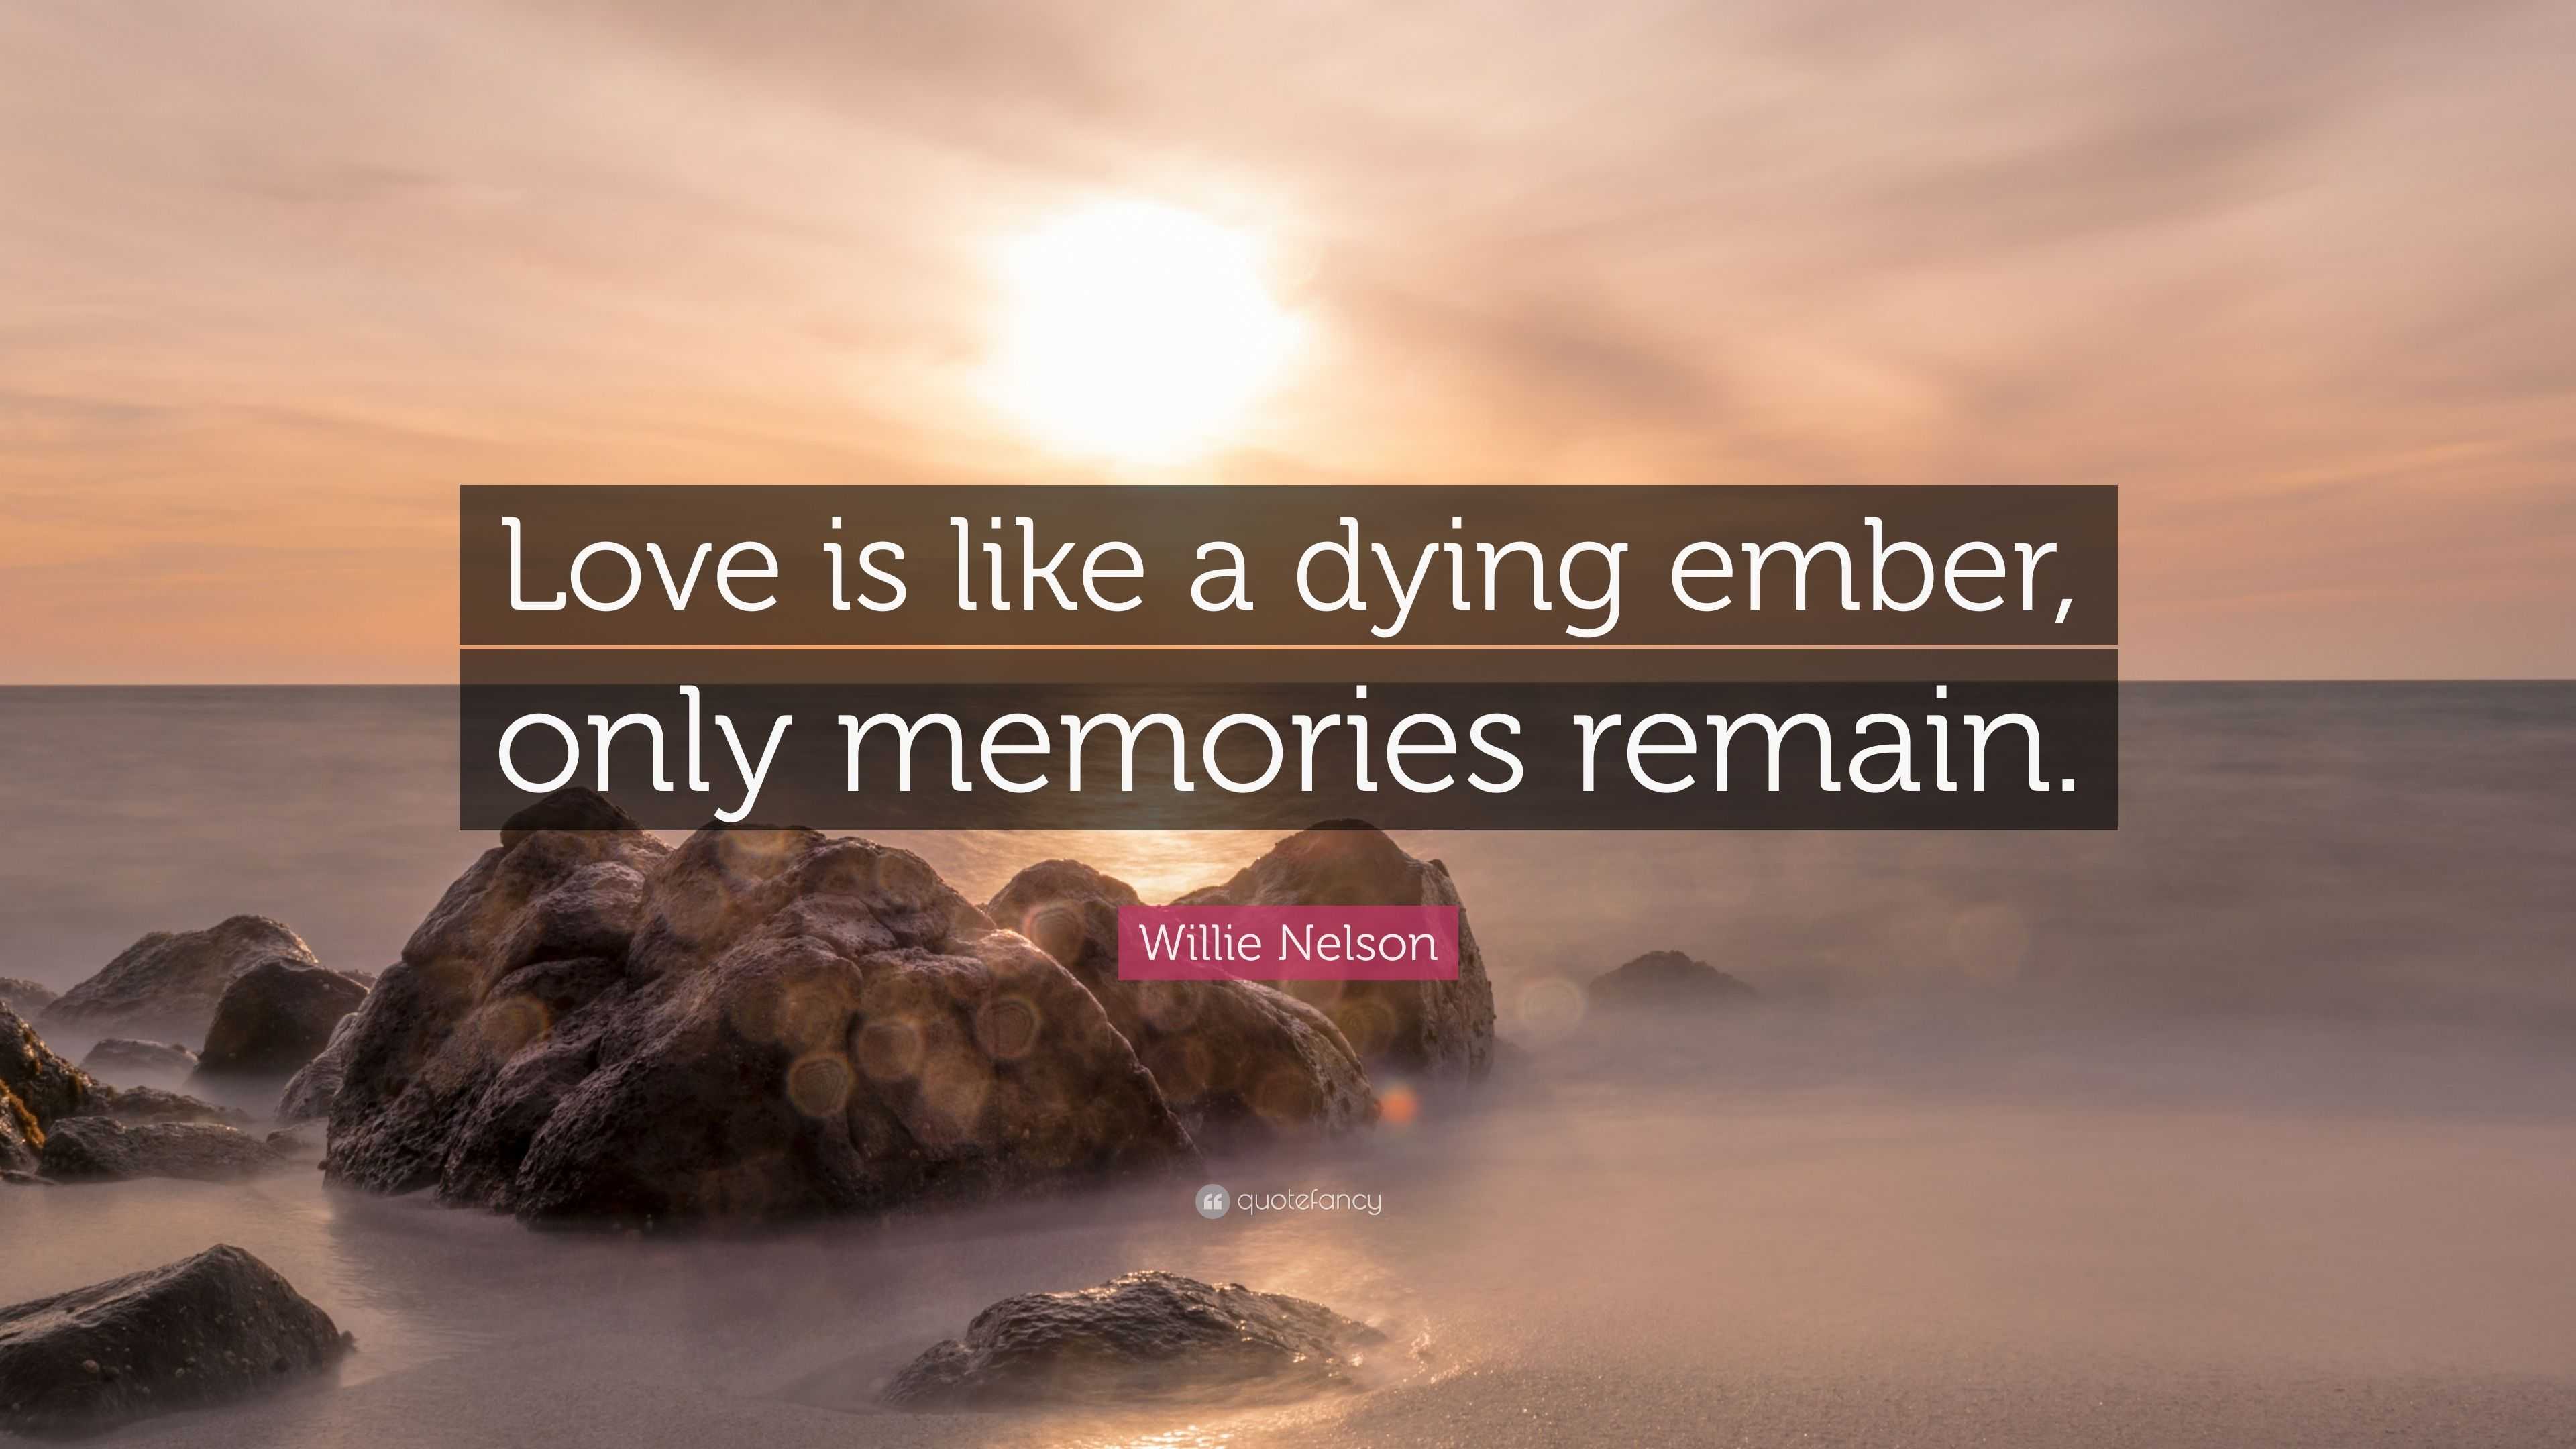 Willie Nelson Quote “Love is like a dying ember only memories remain